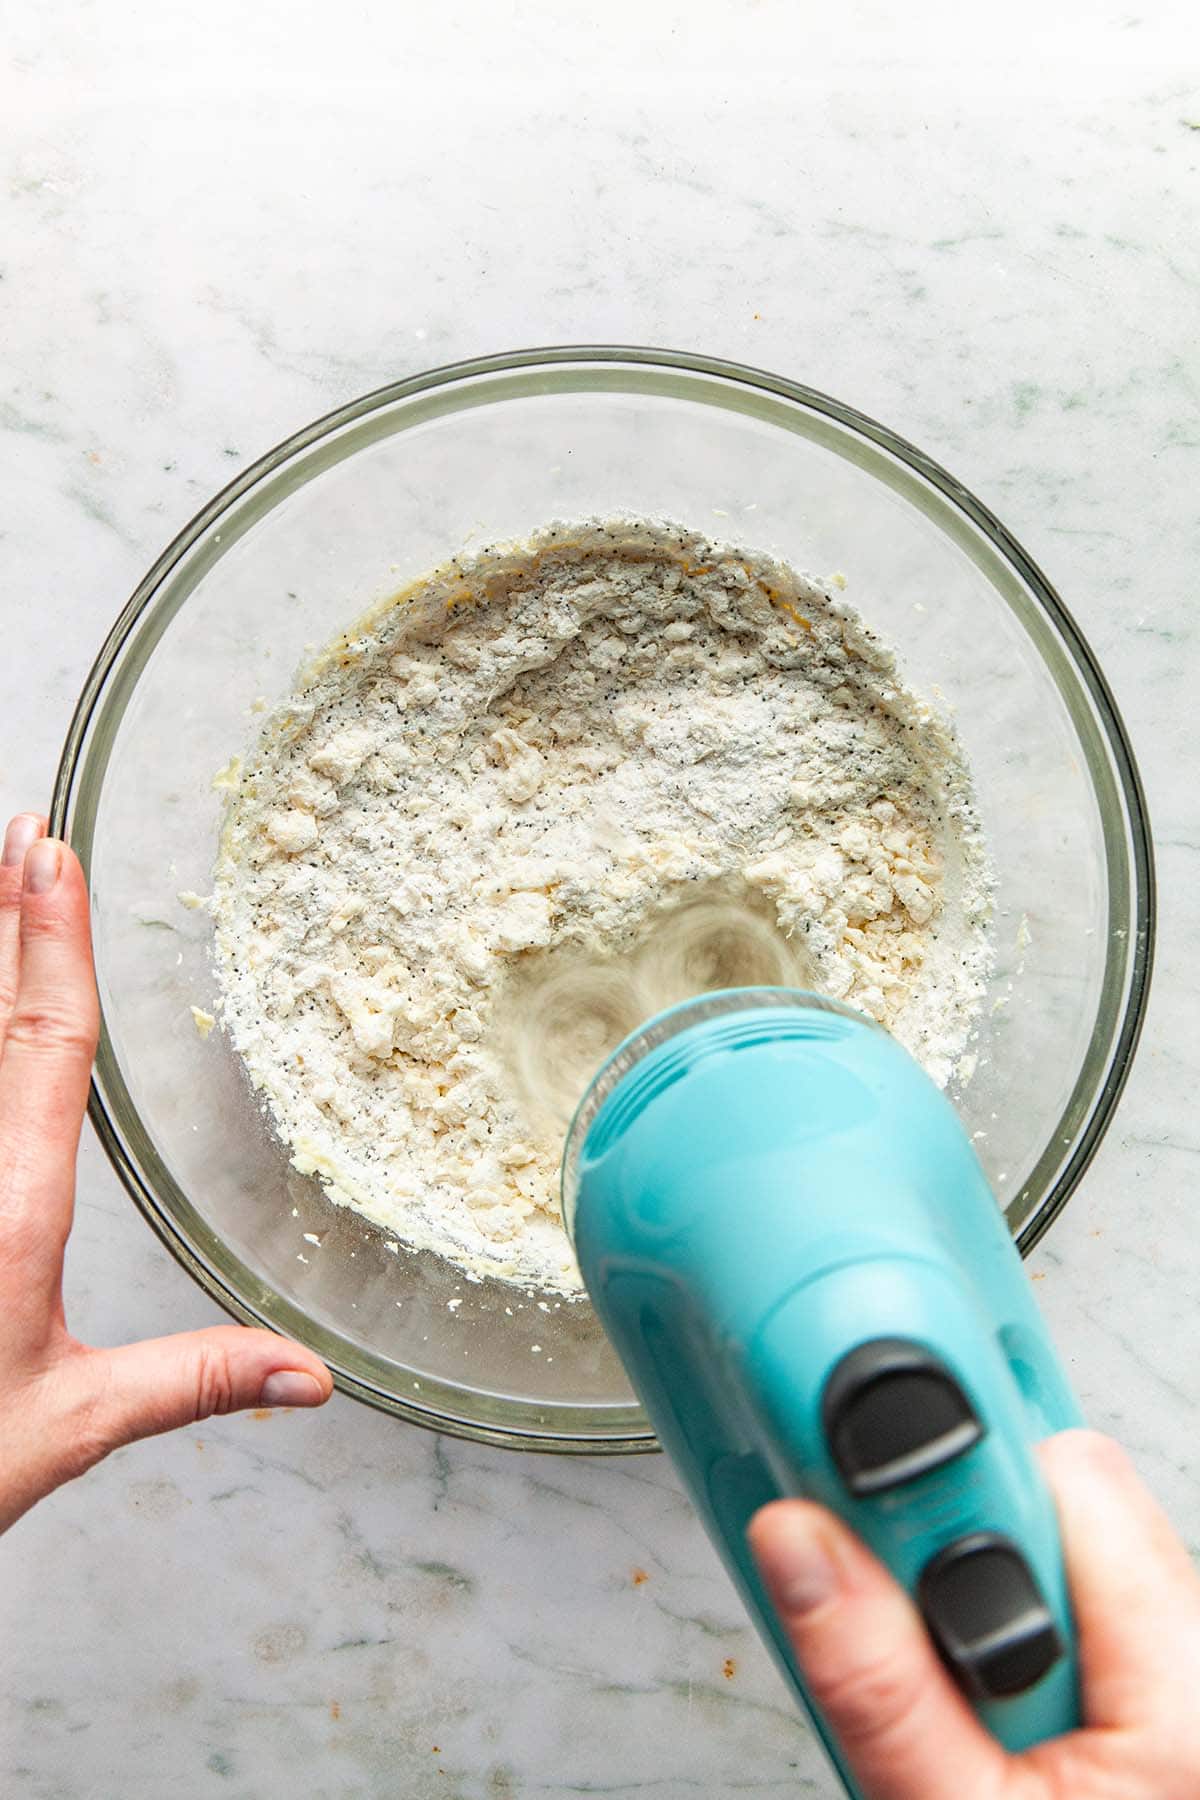 A hand mixer being used to mix flour and butter.